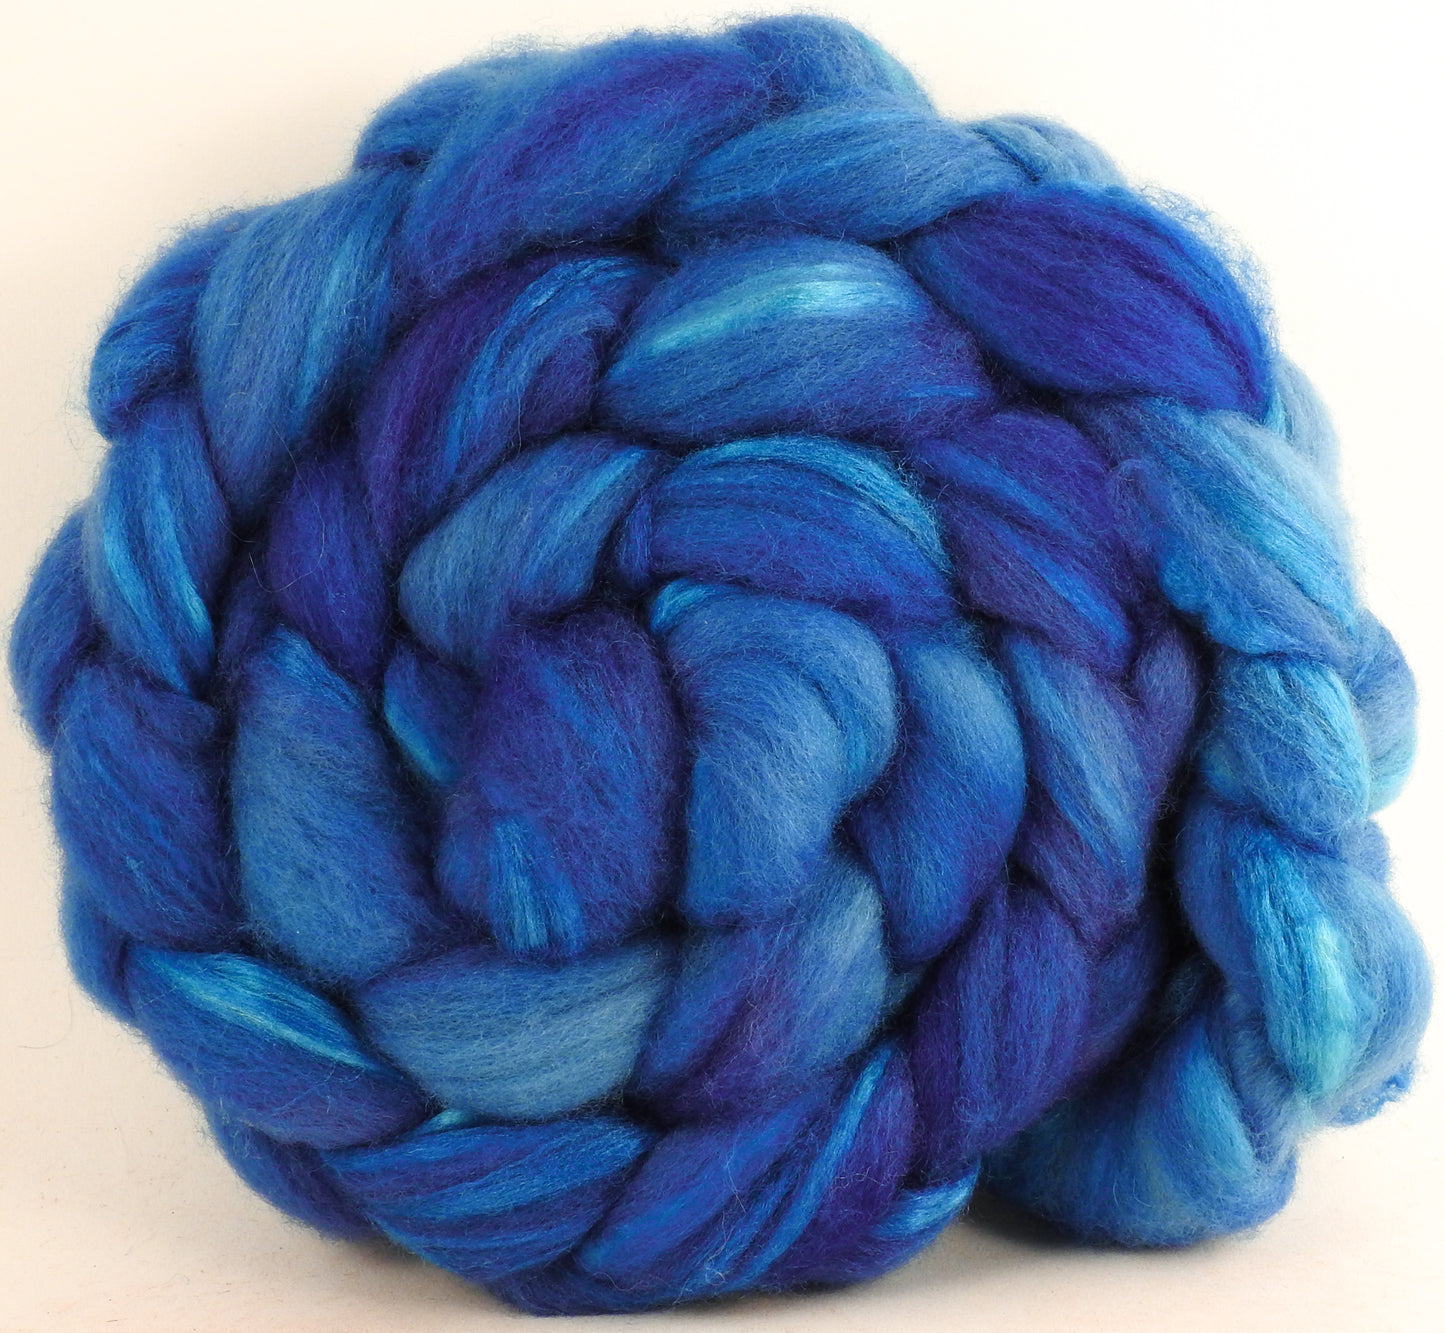 Blue-faced Leicester/ Tussah Silk (70/30) - Forget-Me-Not - (5.4 oz.)